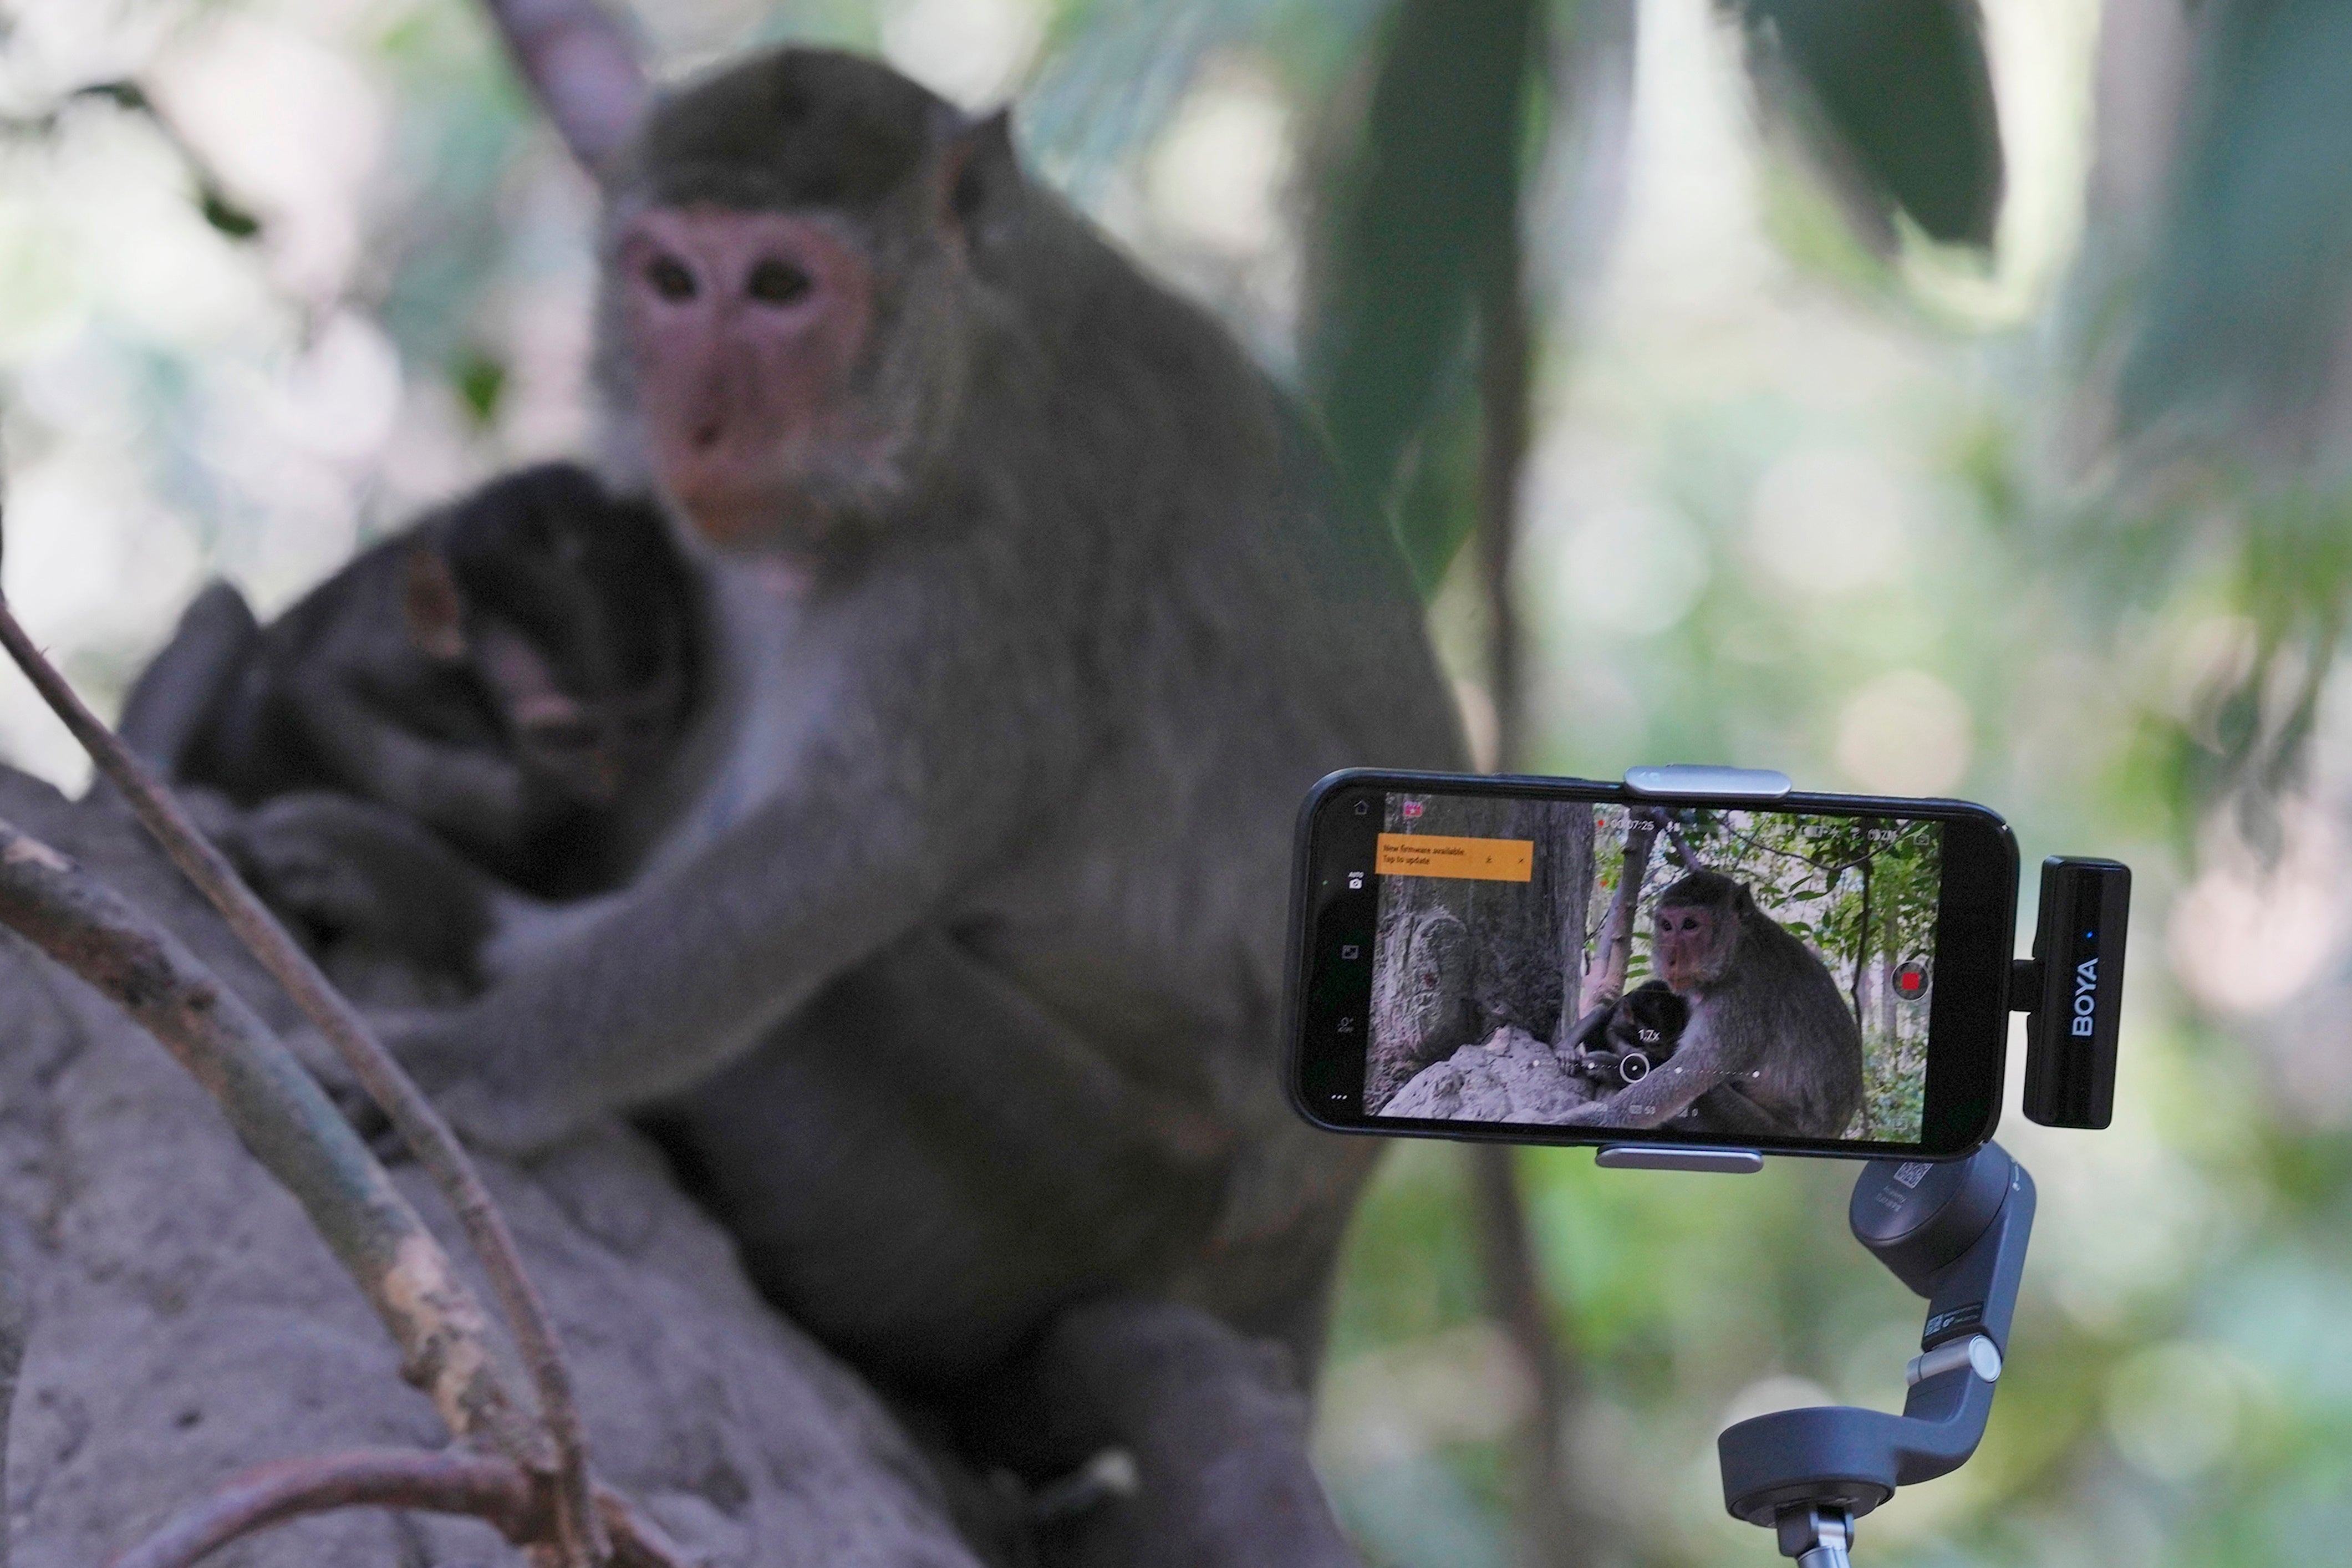 YouTuber Ium Daro, who started filming Angkor monkeys about three months ago, follows a mother and a baby along a dirt path with his iPhone held on a selfie stick near Bayon temple at Angkor Wat temple complex in Siem Reap province, Cambodia